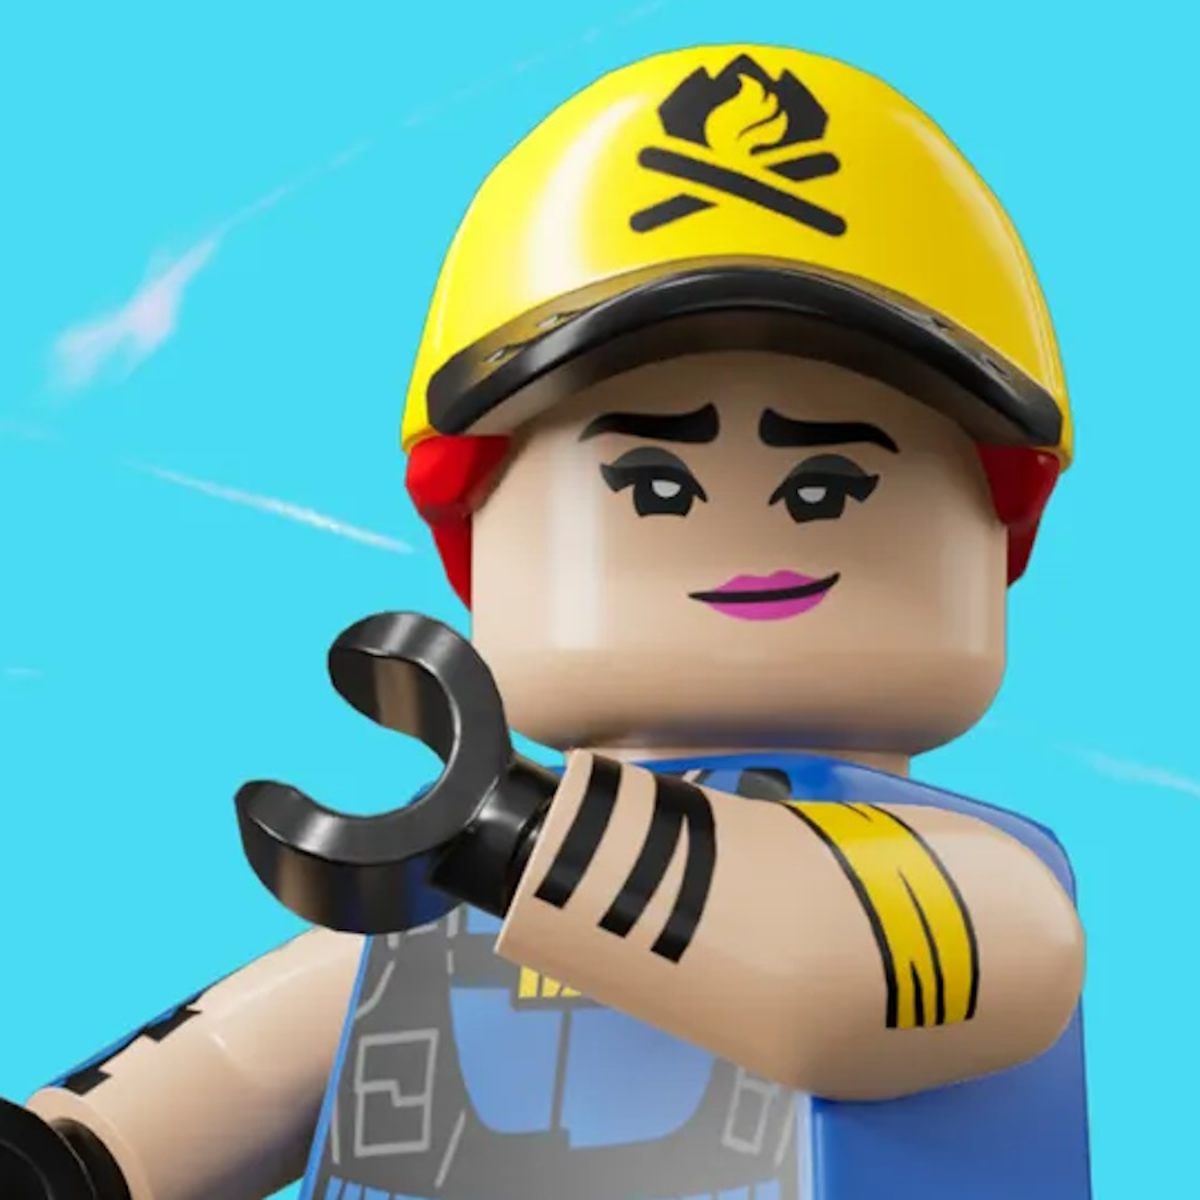 How to get Fortnite Lego Insiders skin for free